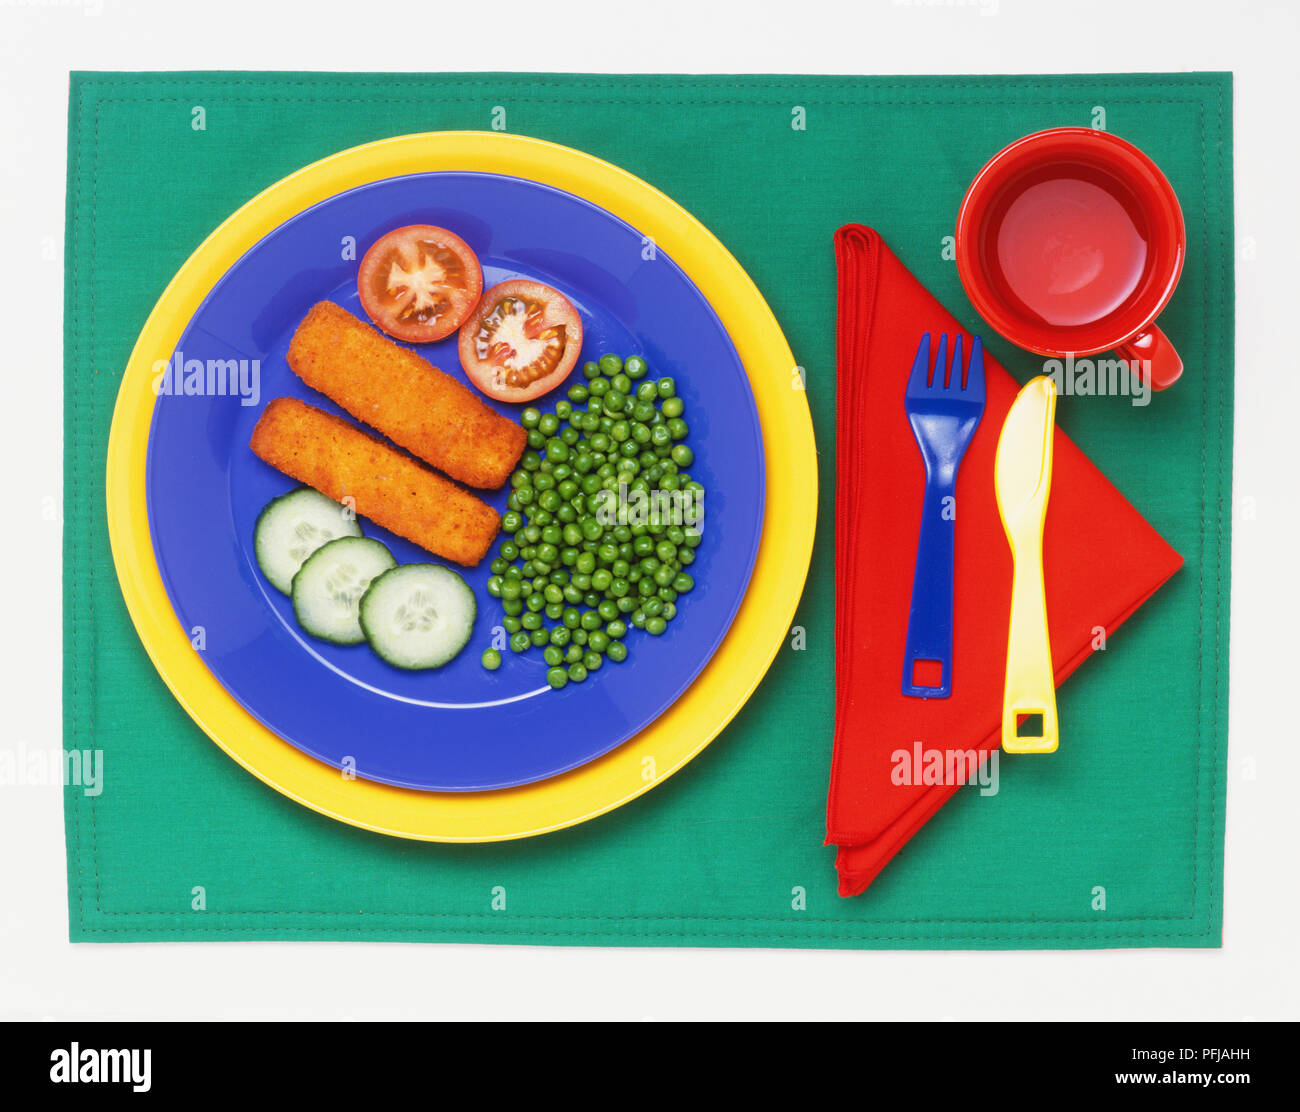 Fish fingers, peas, tomato and cucumber slices on a plate, plastic fork and knife on folded red napkin, and red mug, view from above Stock Photo